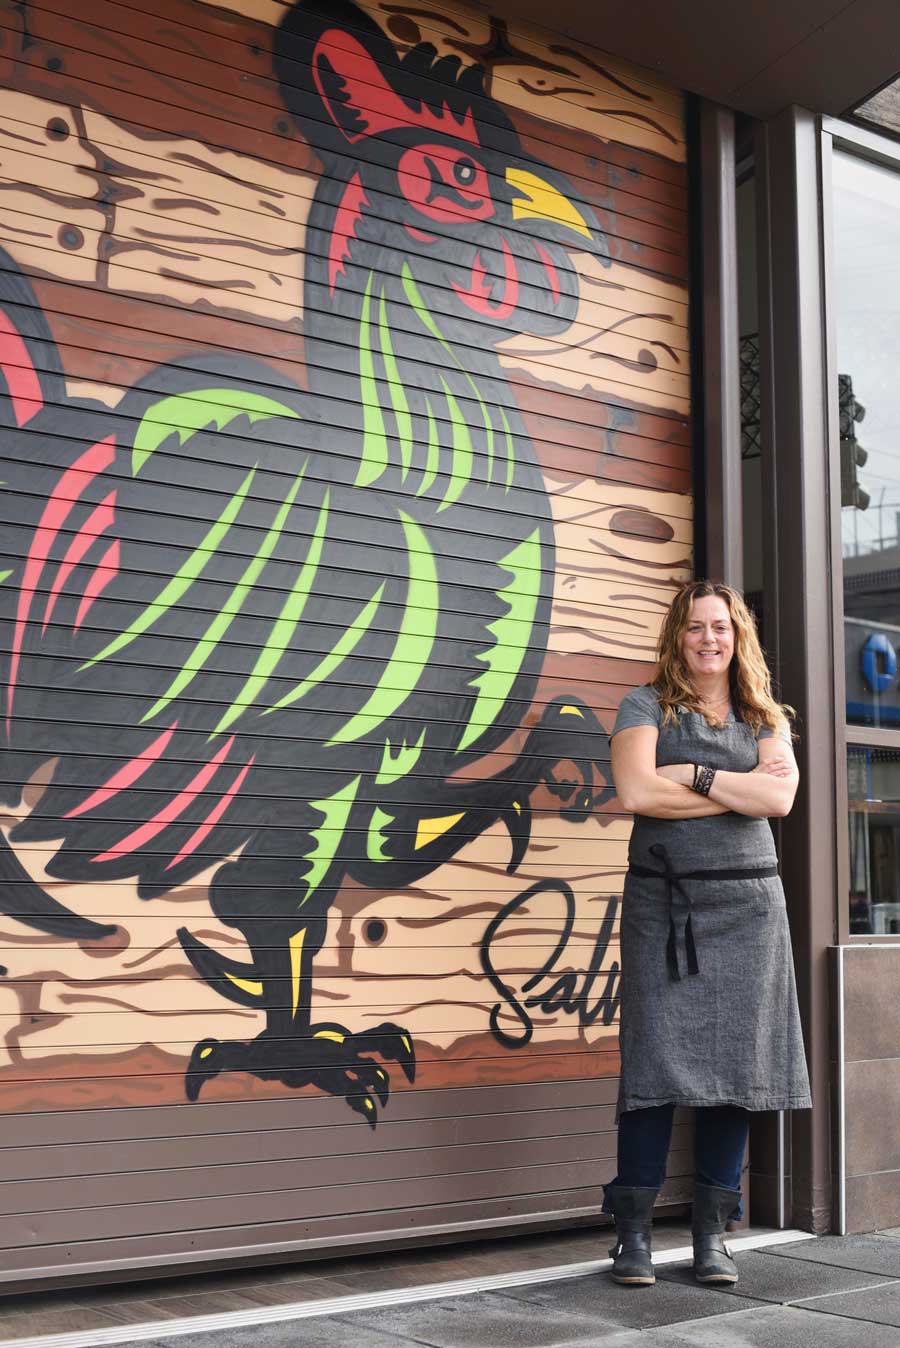 The rooster mural on the storefront of chef Trish Tracey's Myriad Gastro Pub is a playful, colorful sight on Mission Street in San Francisco. 